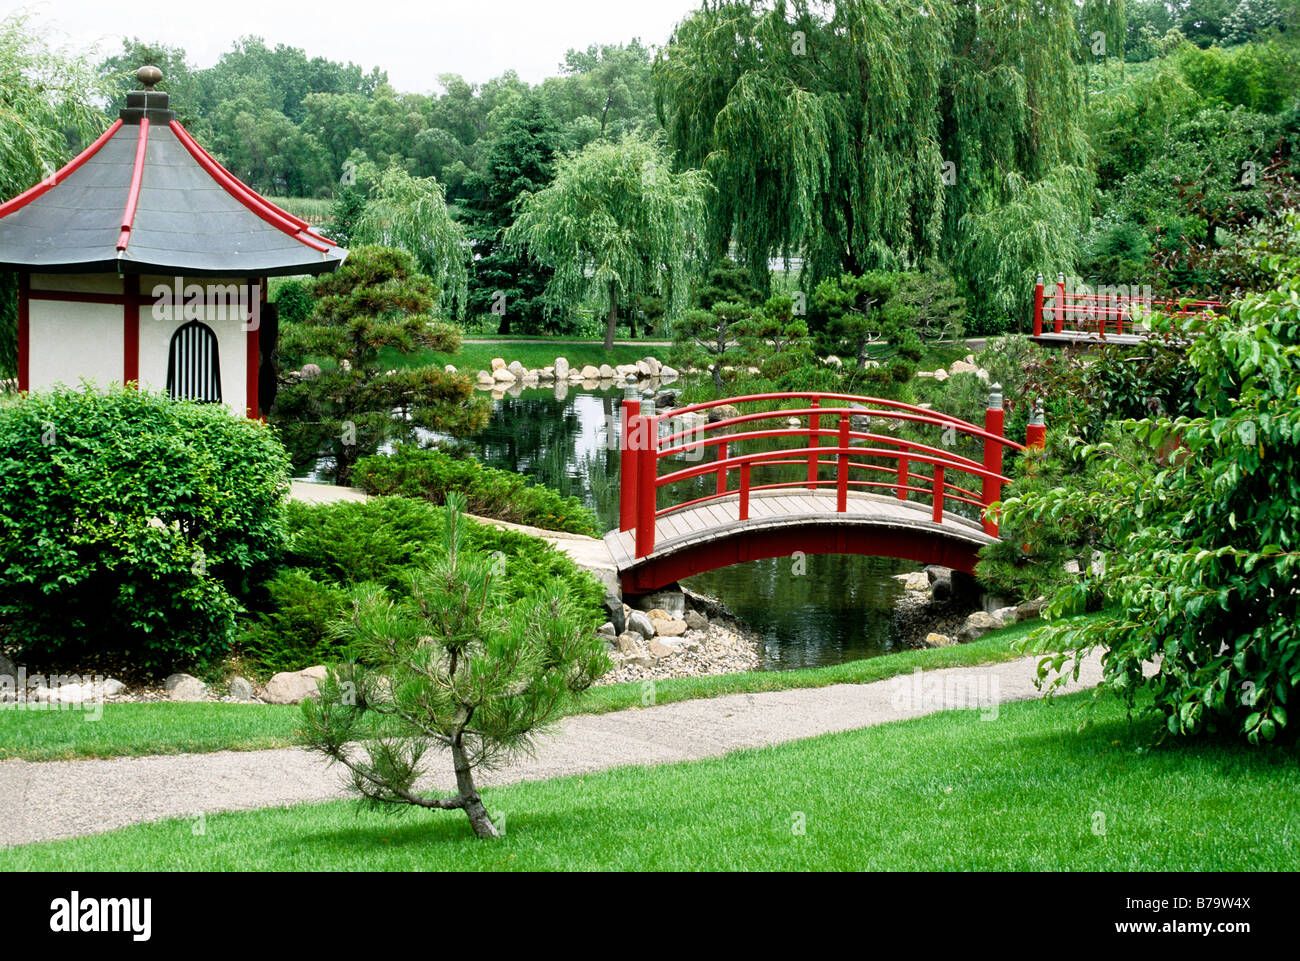 The Japanese Garden At Normandale Community College In Bloomington